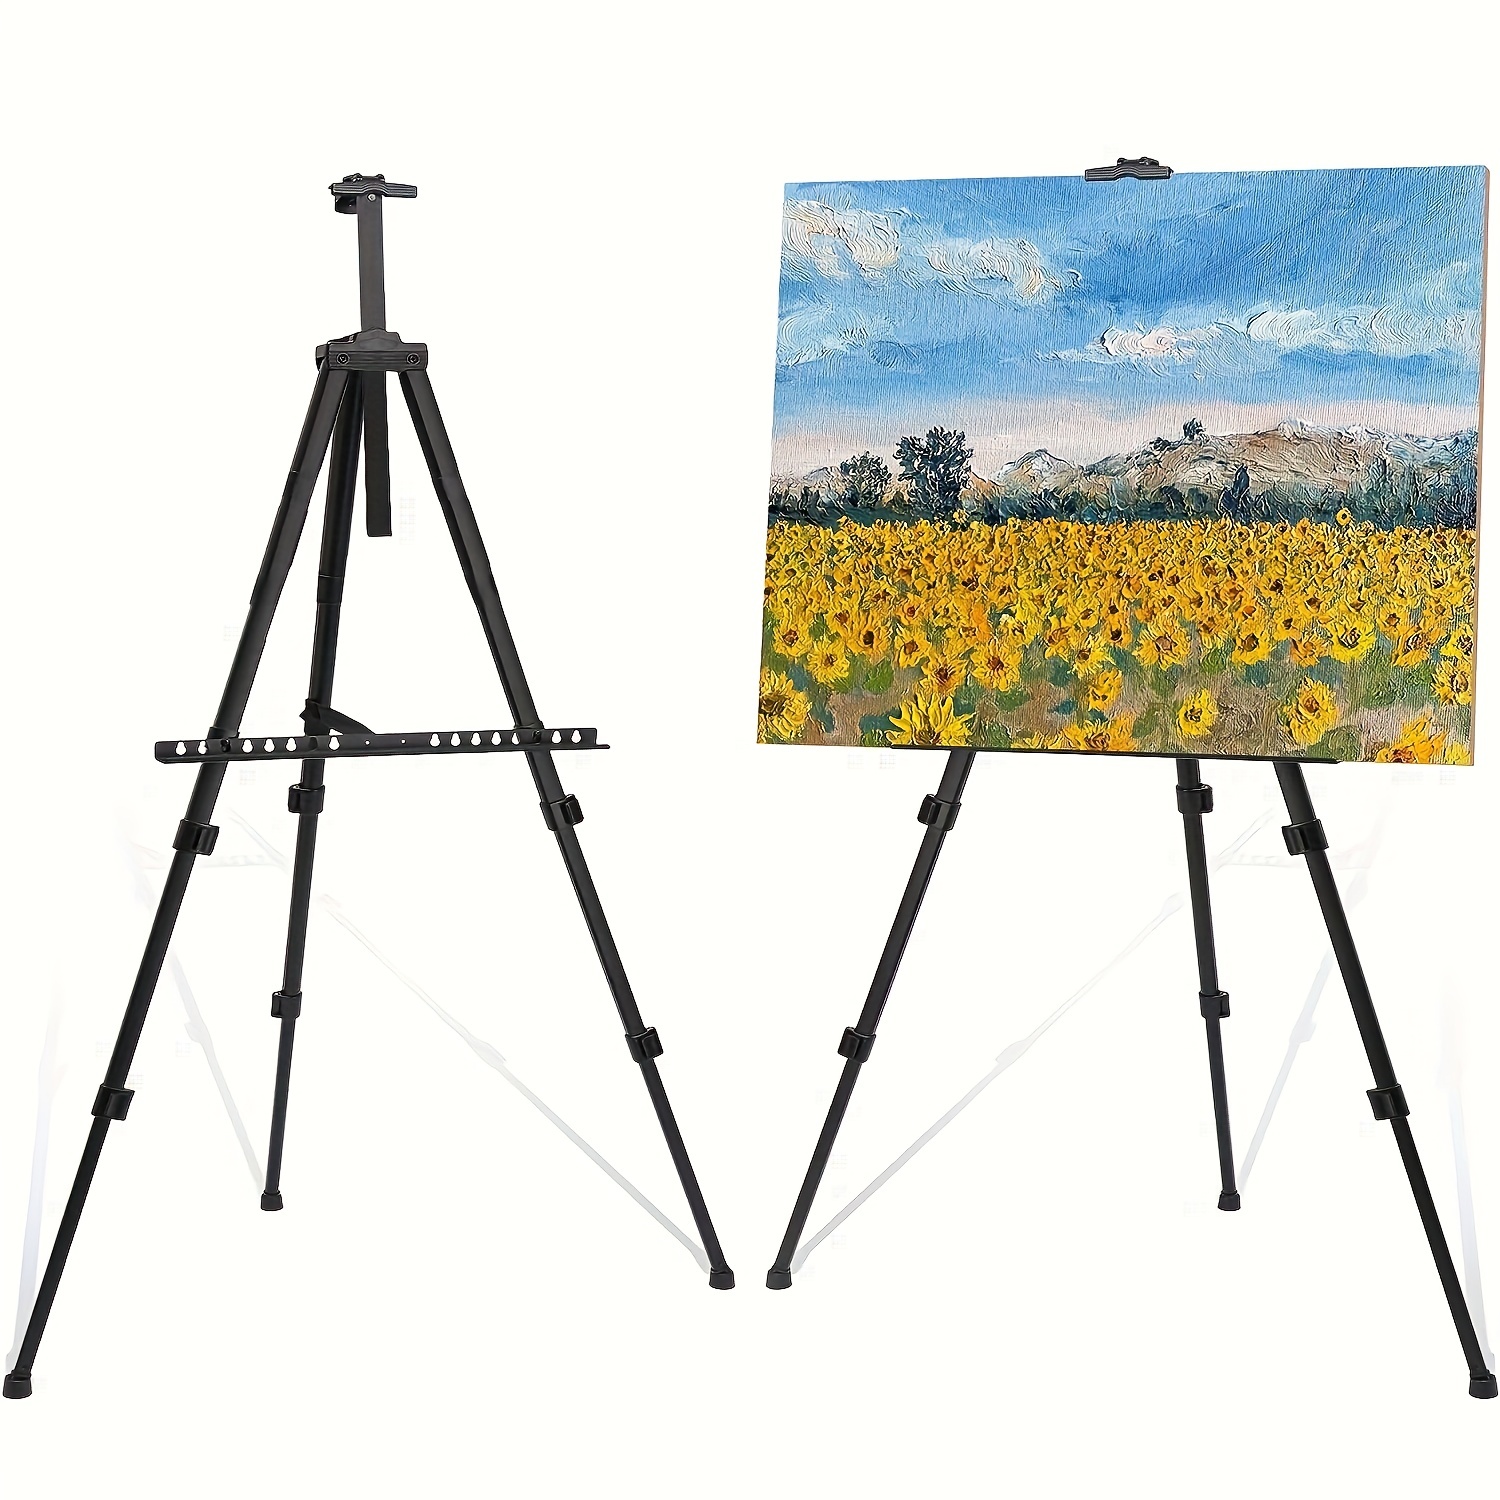 Art Painting Display Easel Stand -ISFORU Portable Adjustable Aluminum Metal  Tripod Artist Easel with Bag, Extra Sturdy for Table-Top/Floor Painting